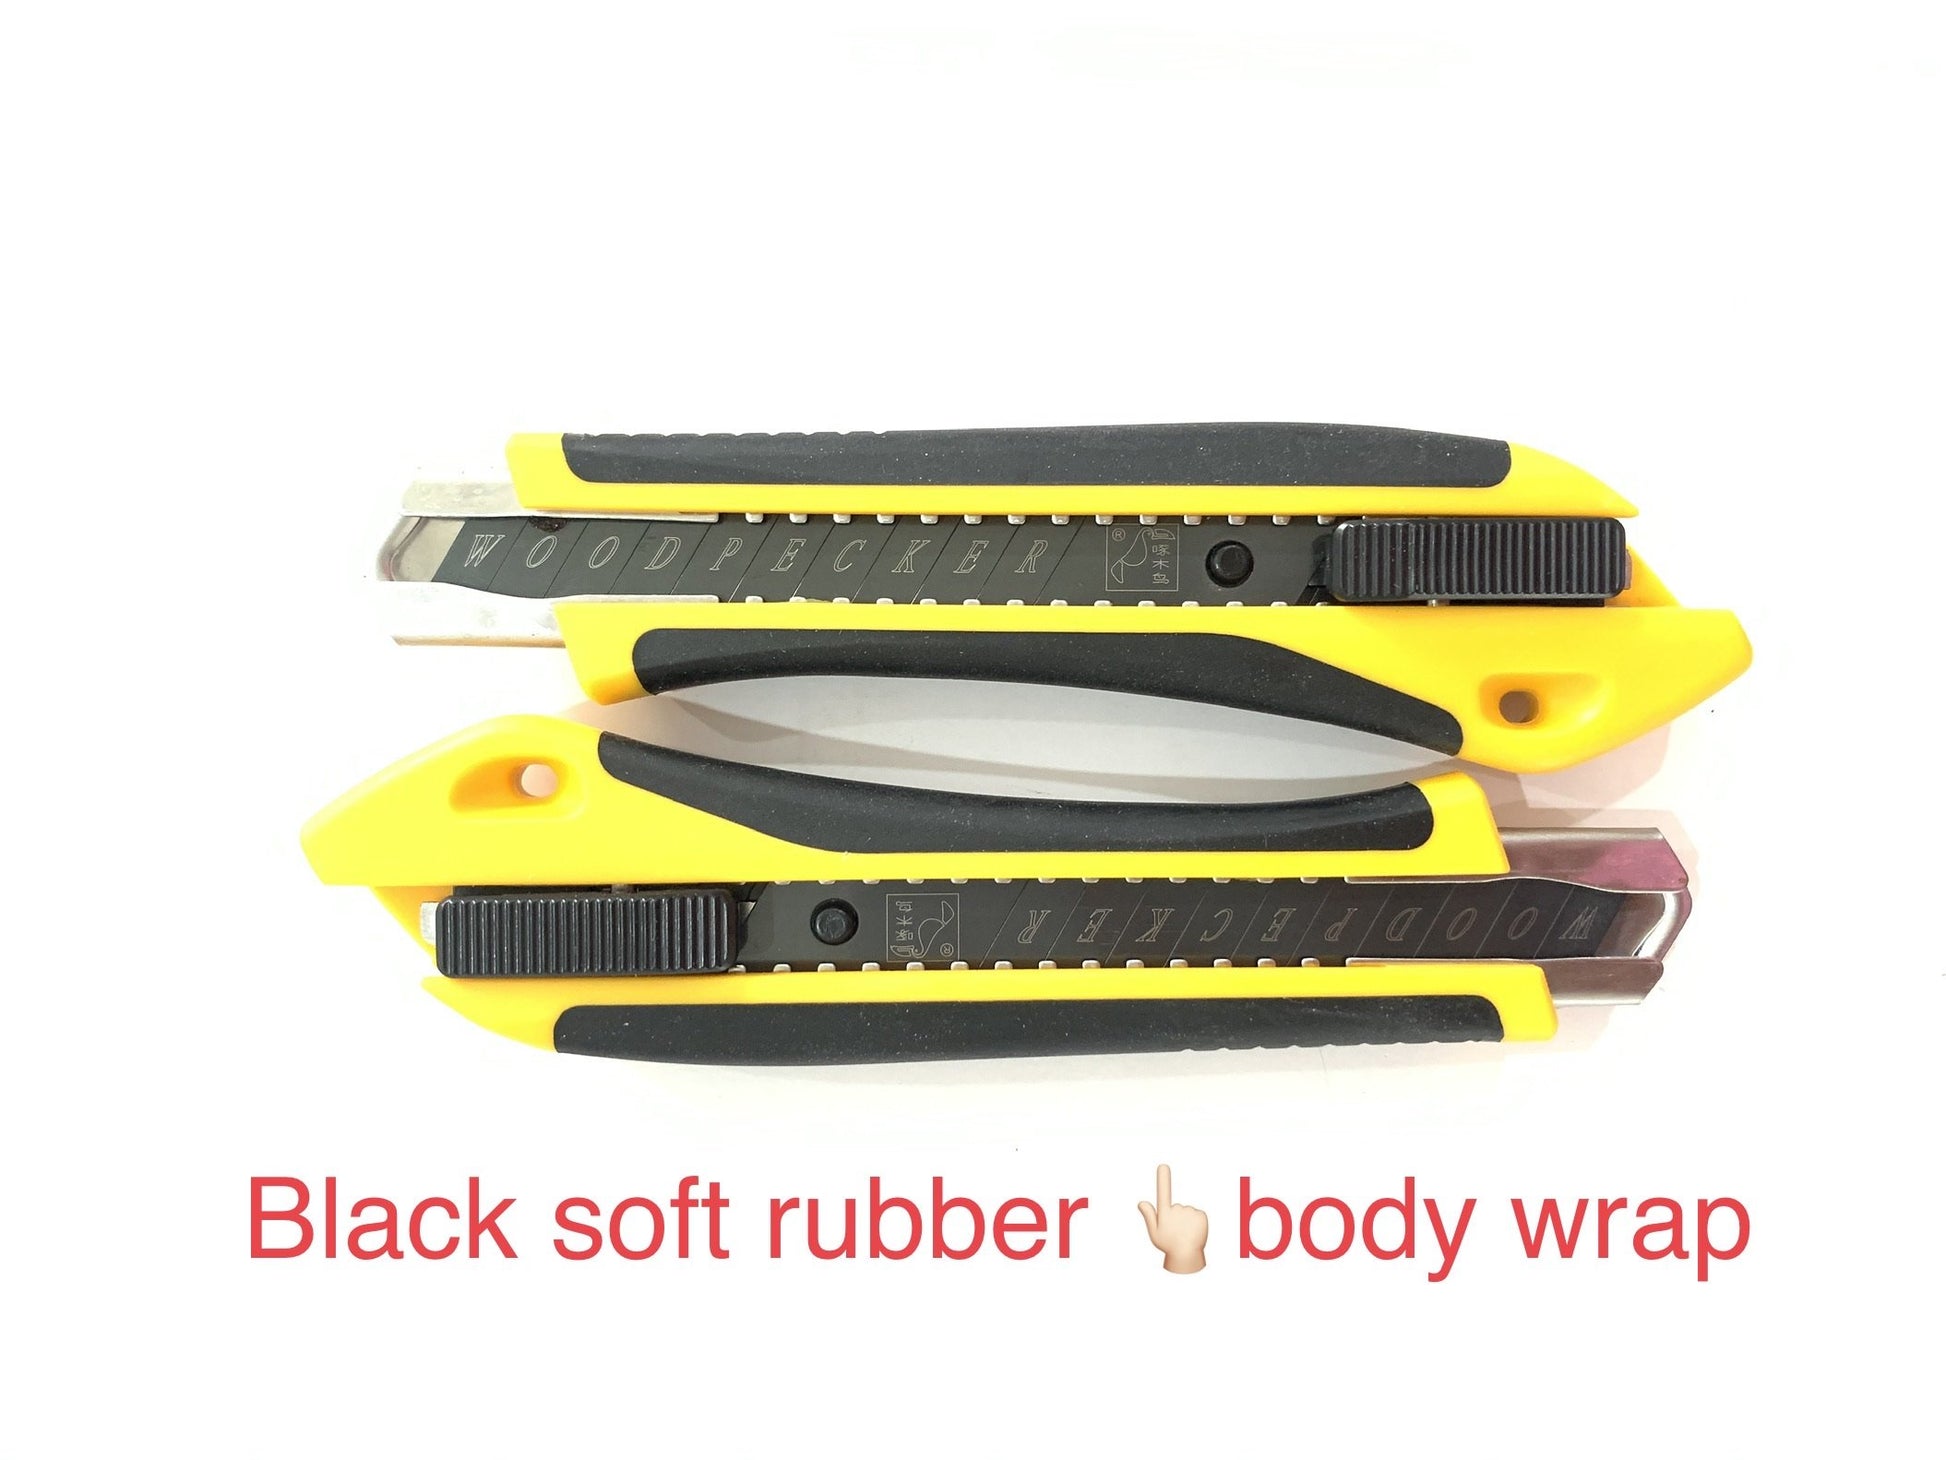 18mm Heavy Duty snap off knife with soft rubber grip